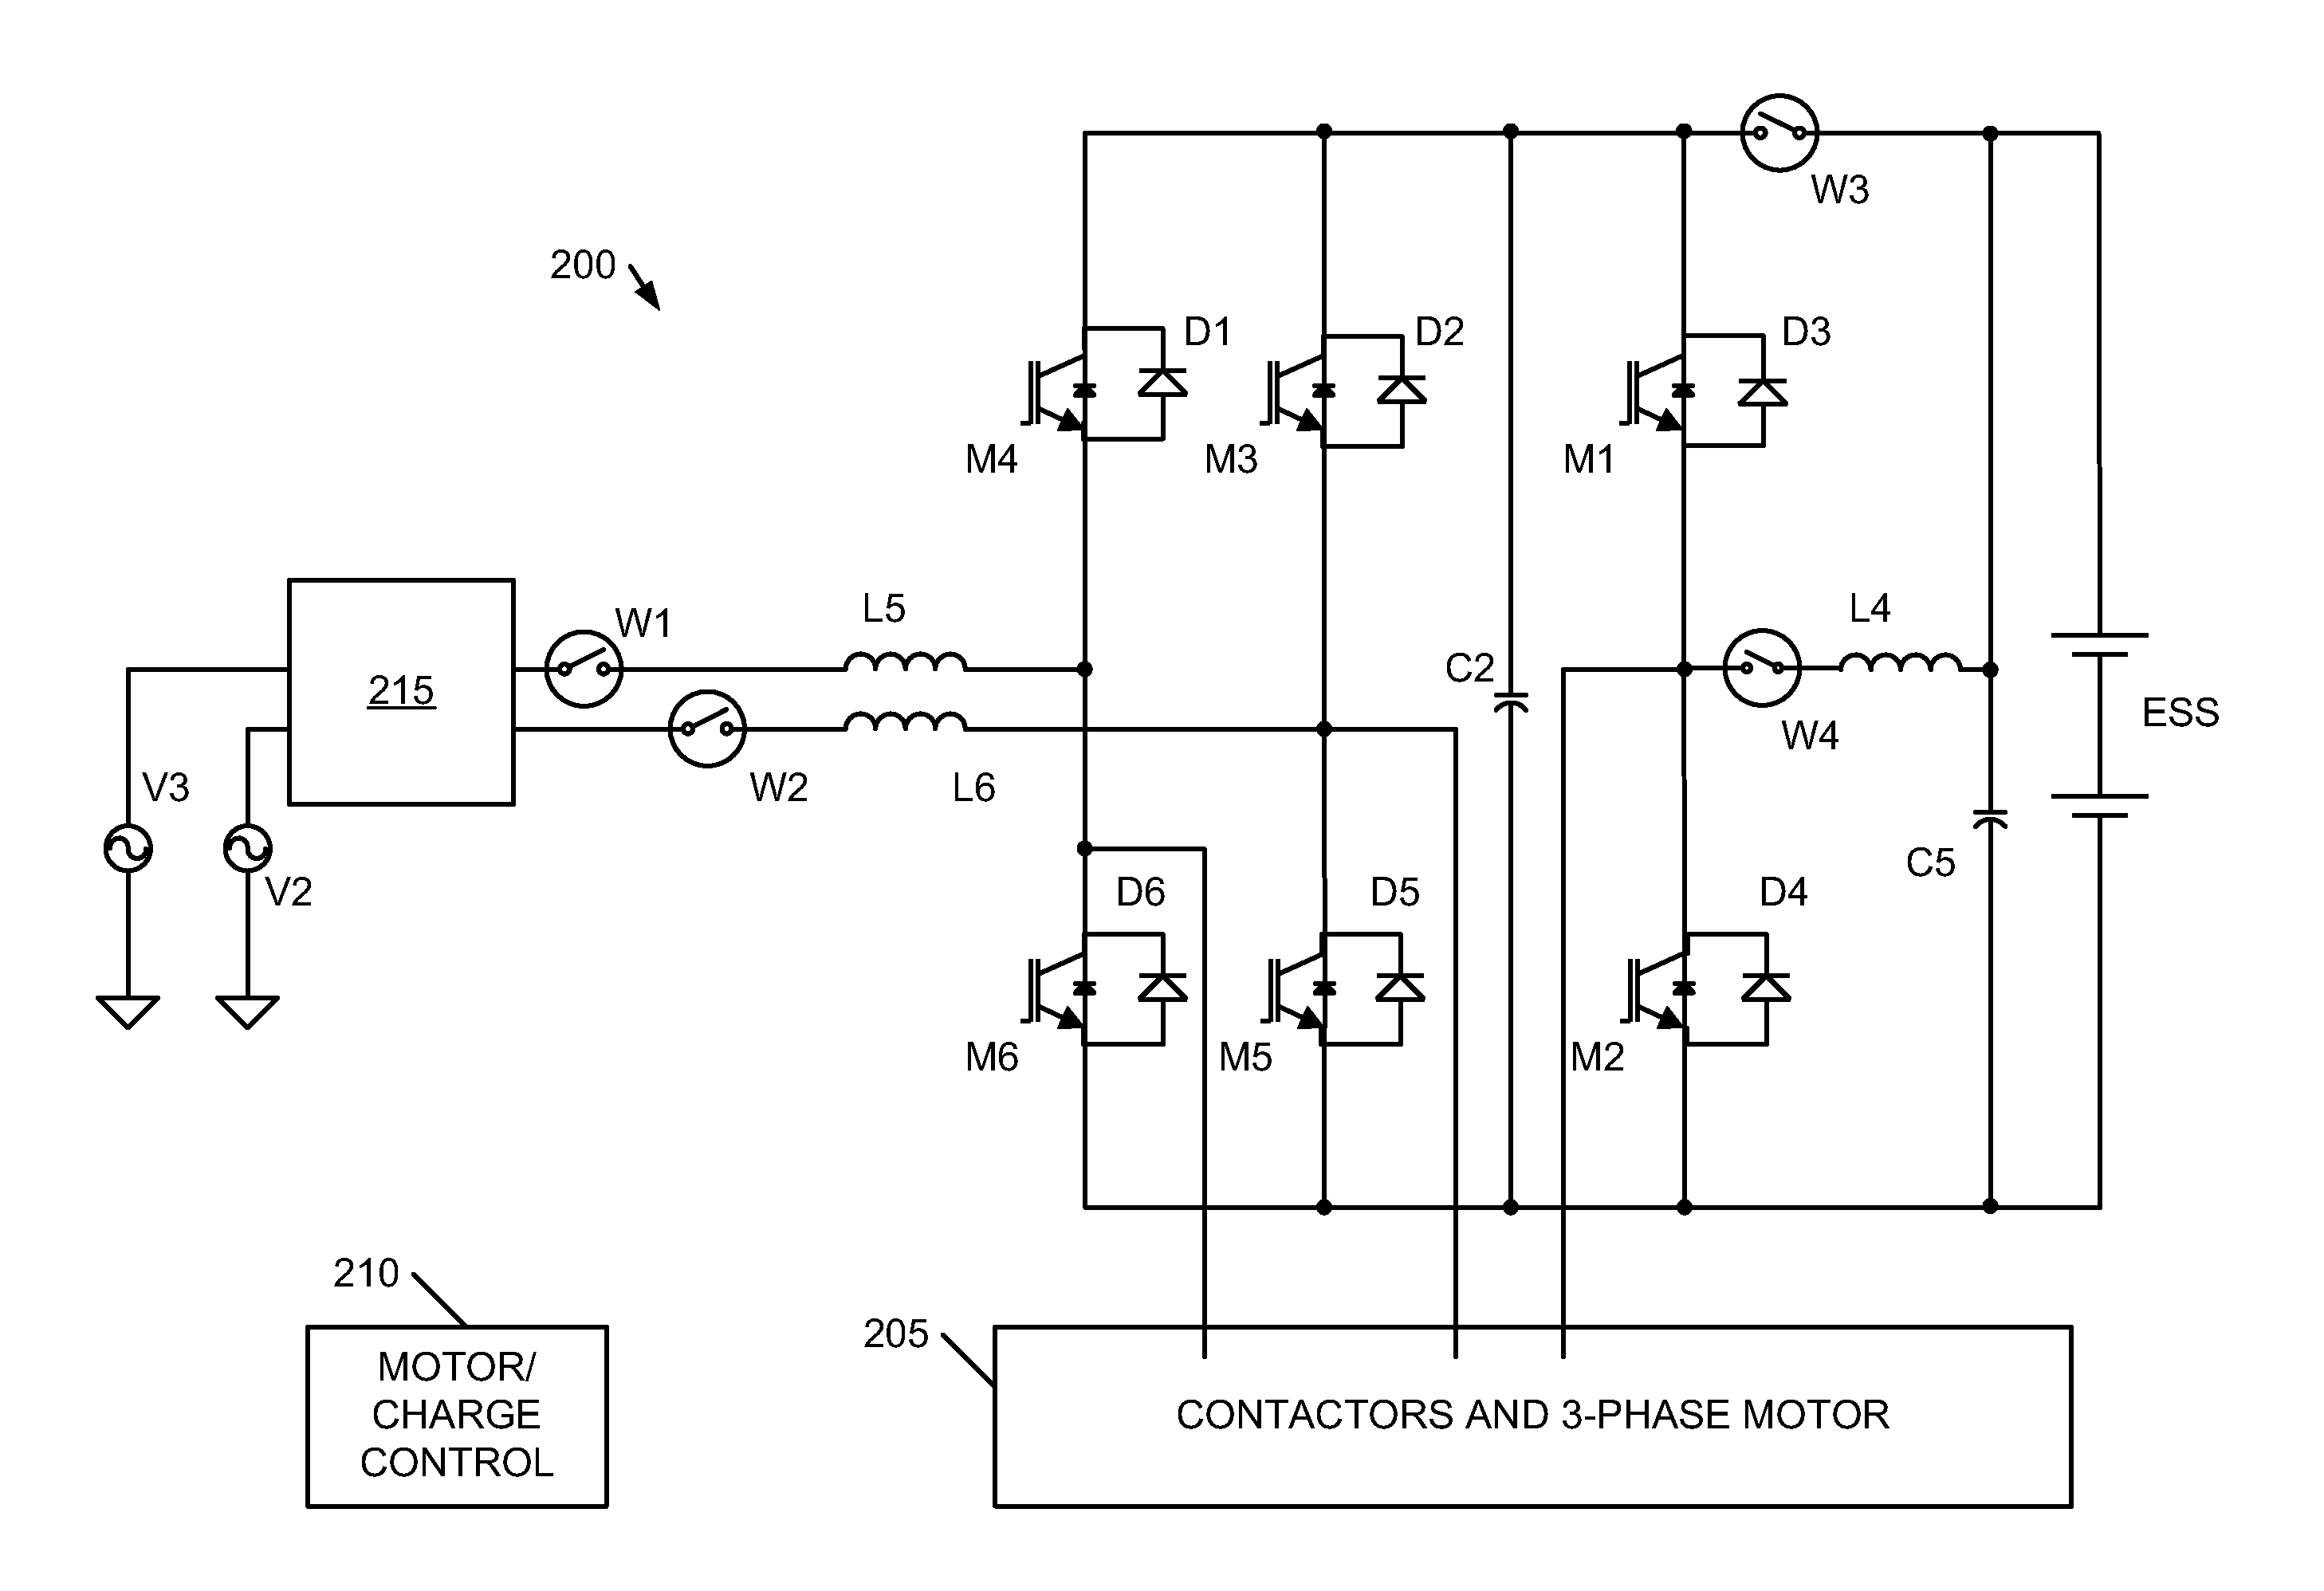 Bidirectional polyphase multimode converter including boost and buck-boost modes